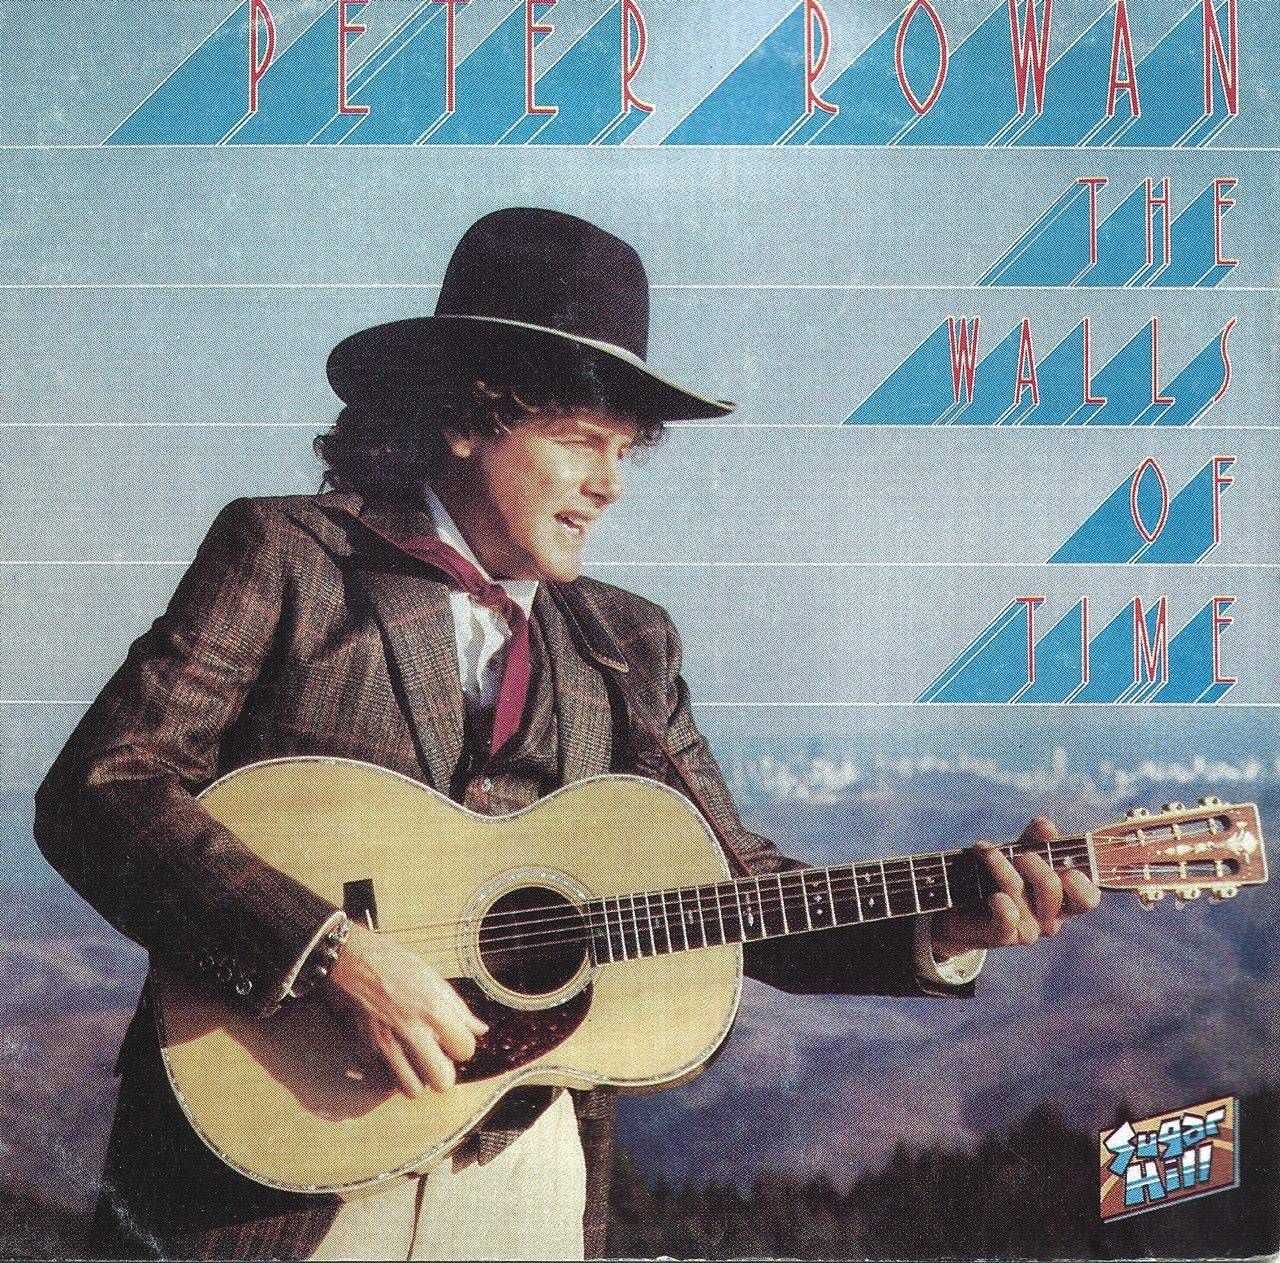 Peter Rowan - The Walls Of Time cover album